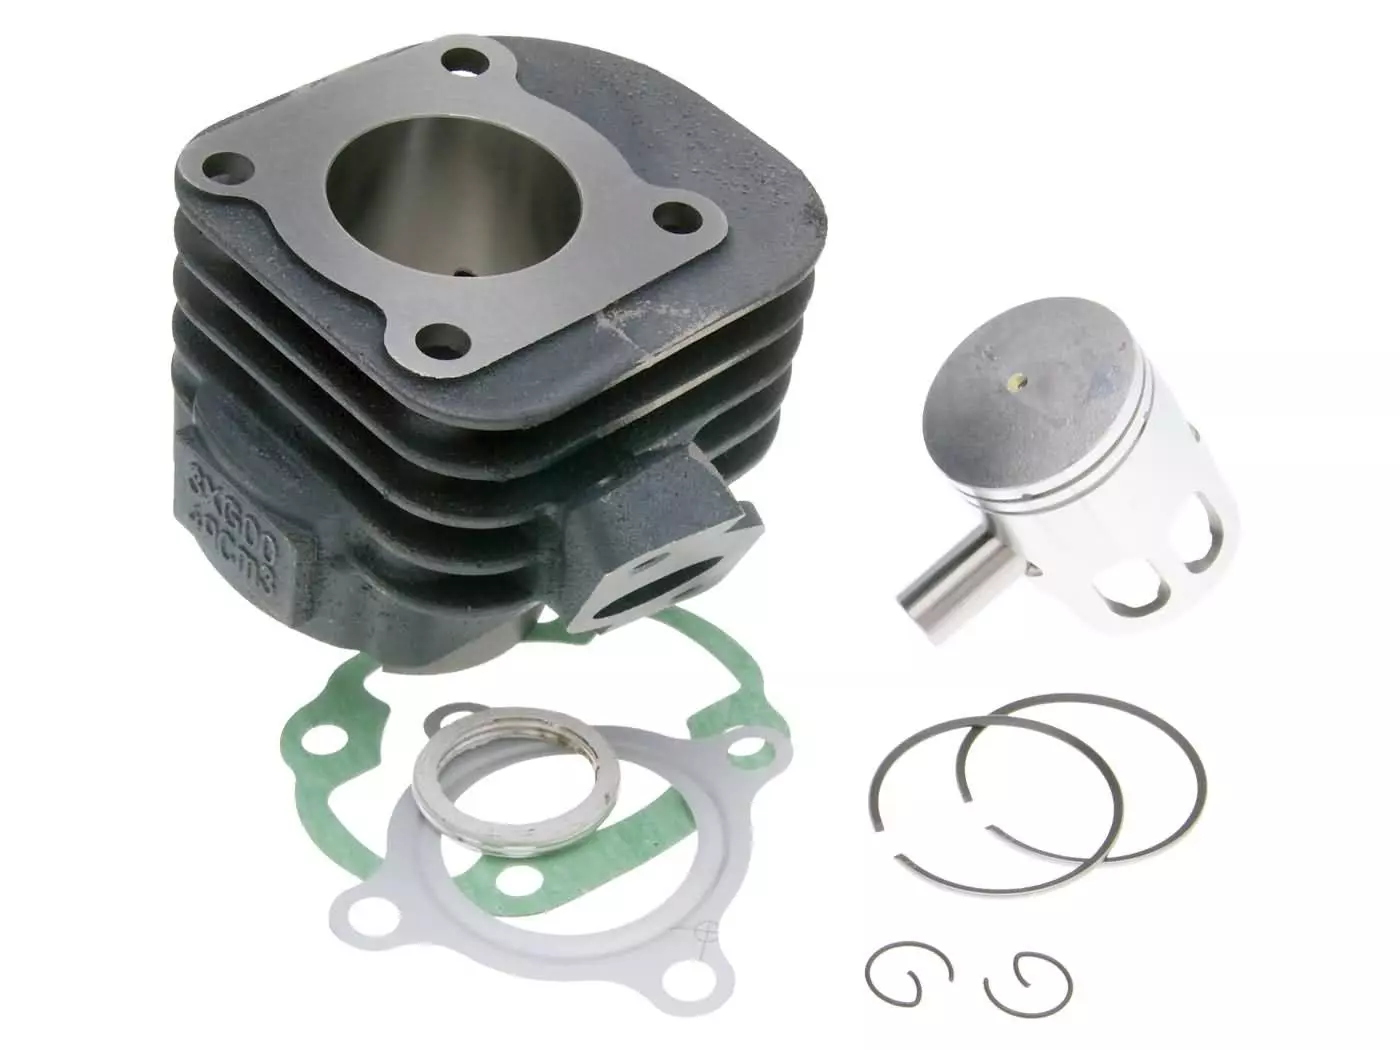 Cylinder Kit 50cc For CPI, Keeway Euro 2 Inclined, 12mm